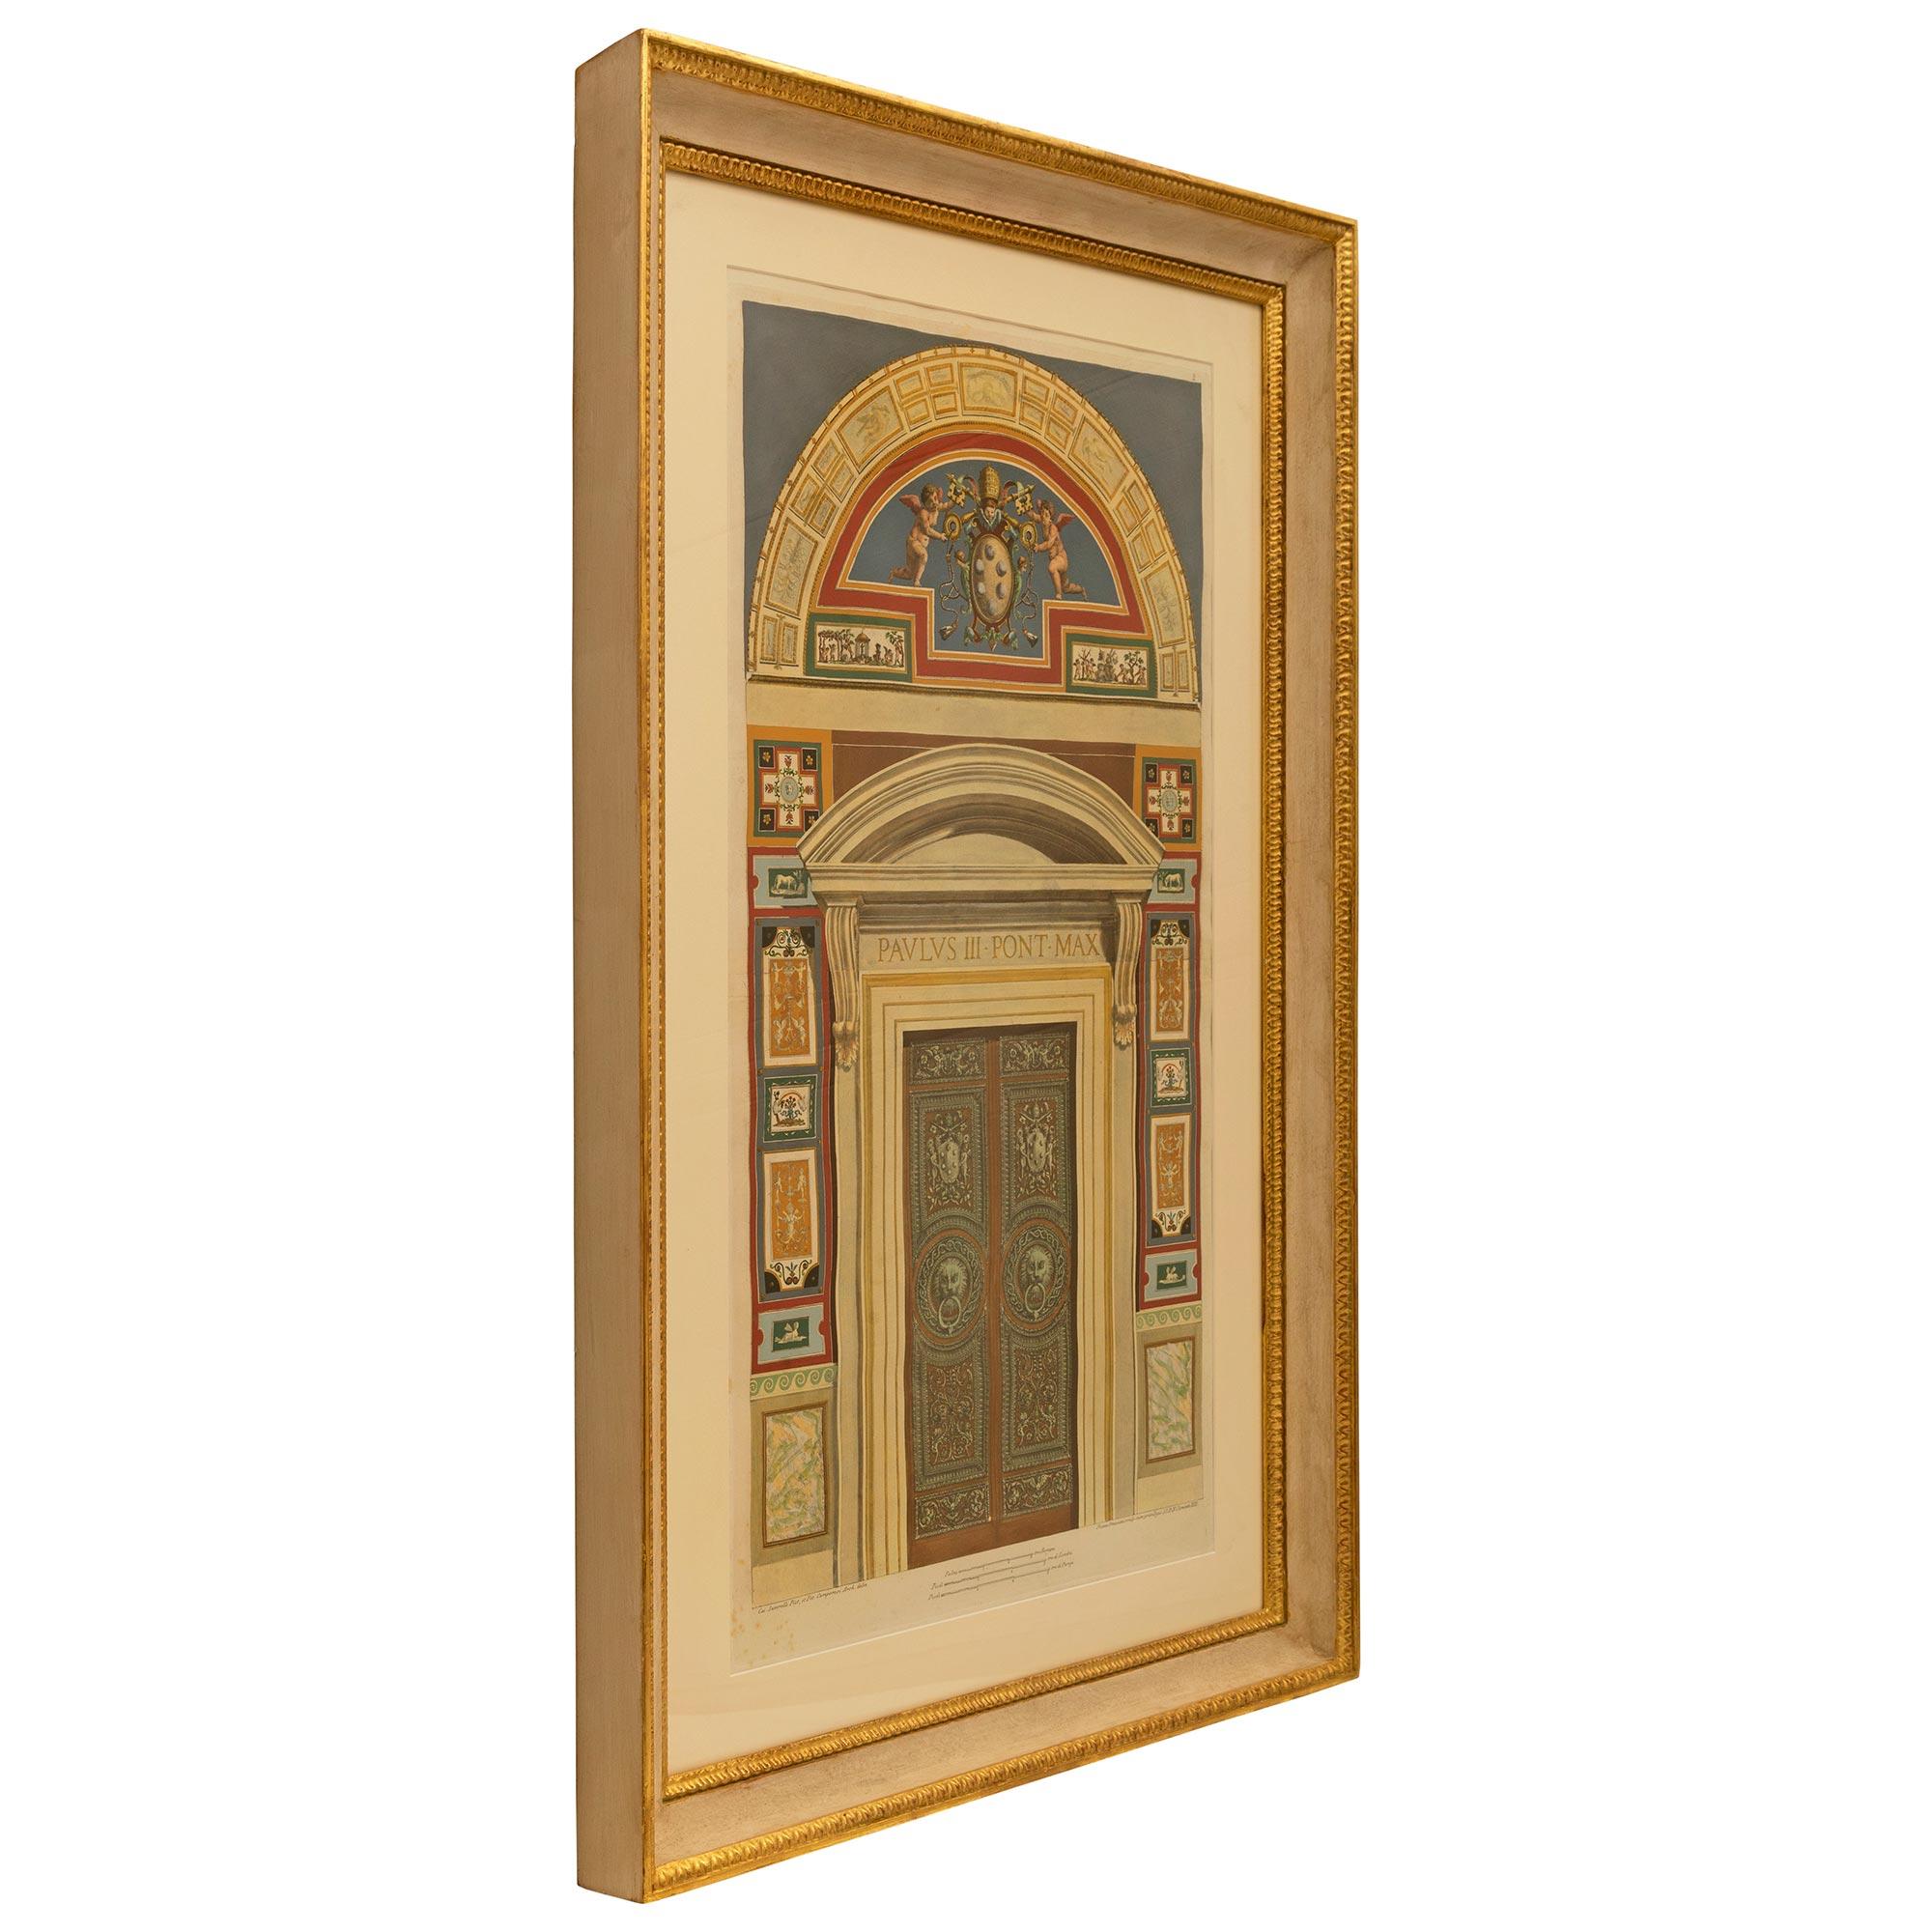 A beautiful and most decorative pair of Italian early 19th century neo-classical st. architectural engravings after Giovanni Ottaviani. Each striking rectangular engraving depicts lovely architectural scenes of impressive doors with handsome lion